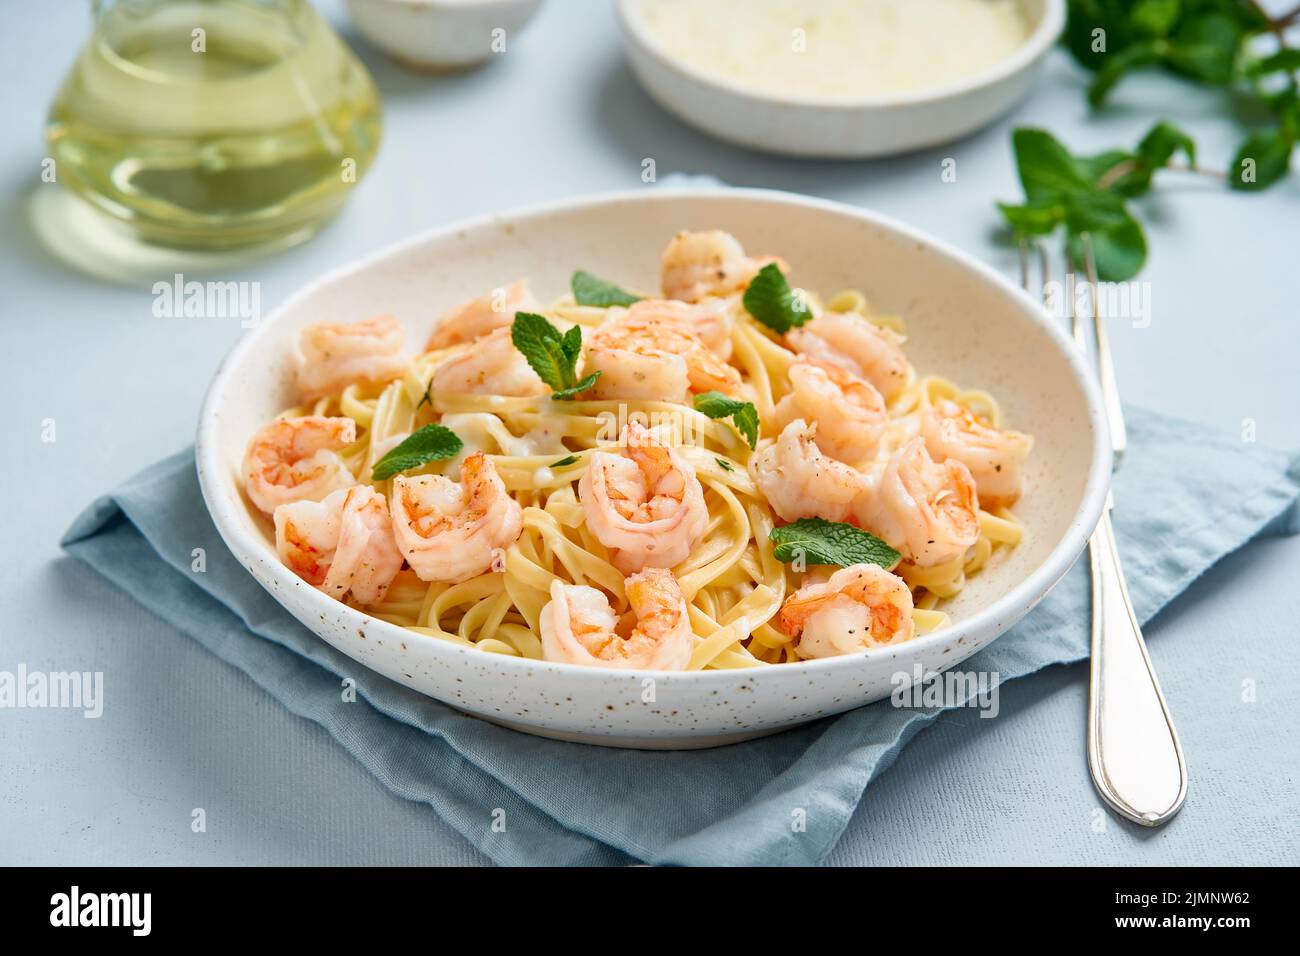 Pasta spaghetti with fried shrimps, bechamel sauce, mint leaf on blue table Stock Photo